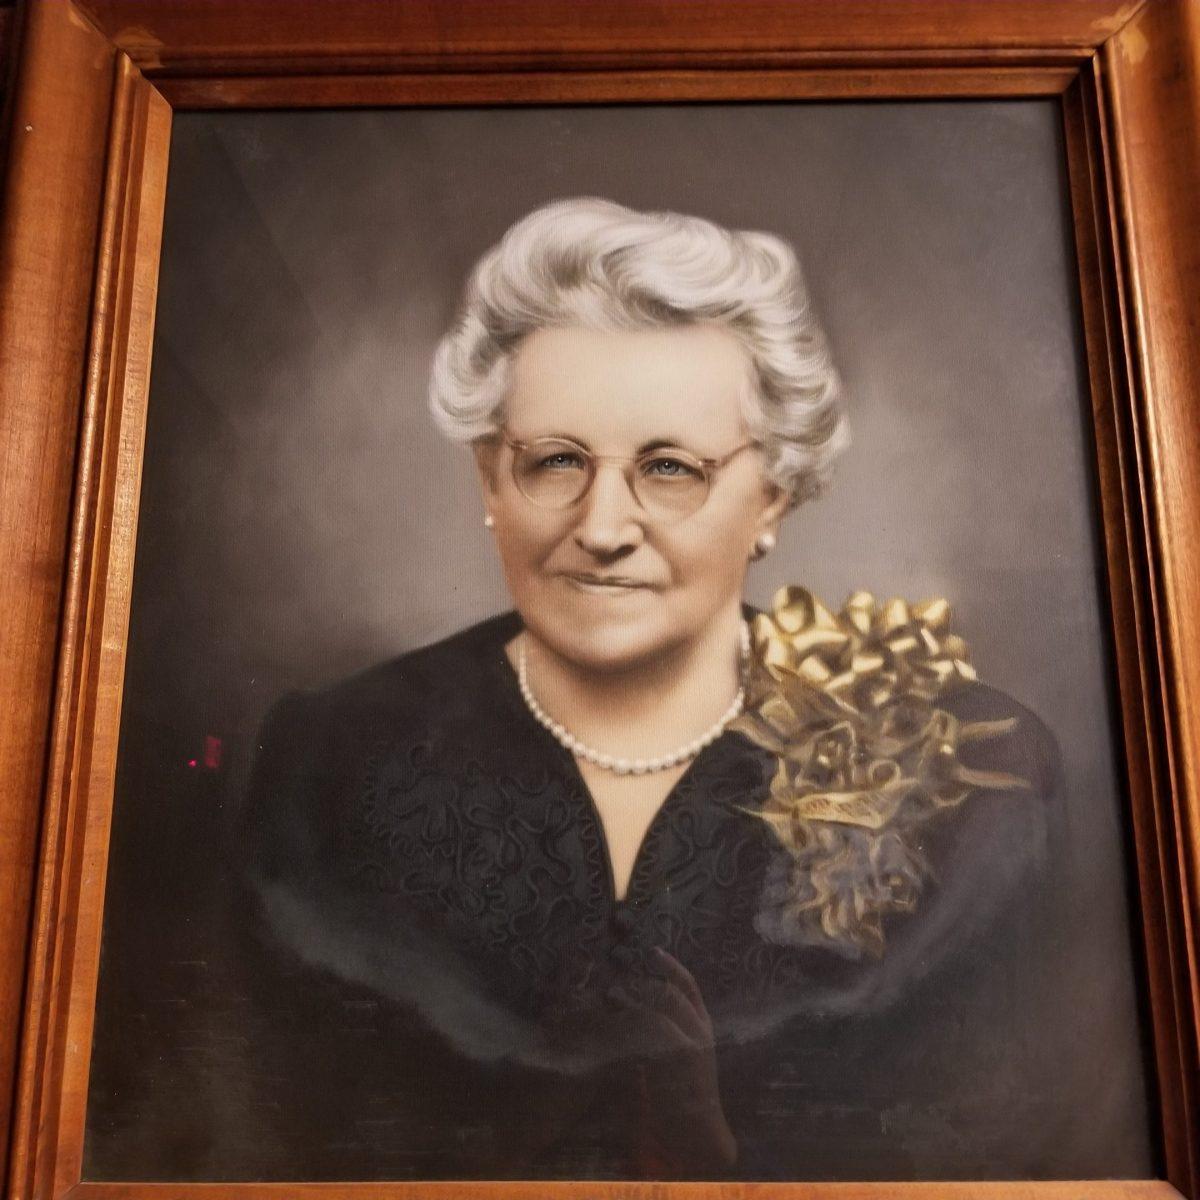 A portrait of Minnie Howard that hangs in the Minne Howard campus lobby. Photo courtesy of Mark Eisenhour.